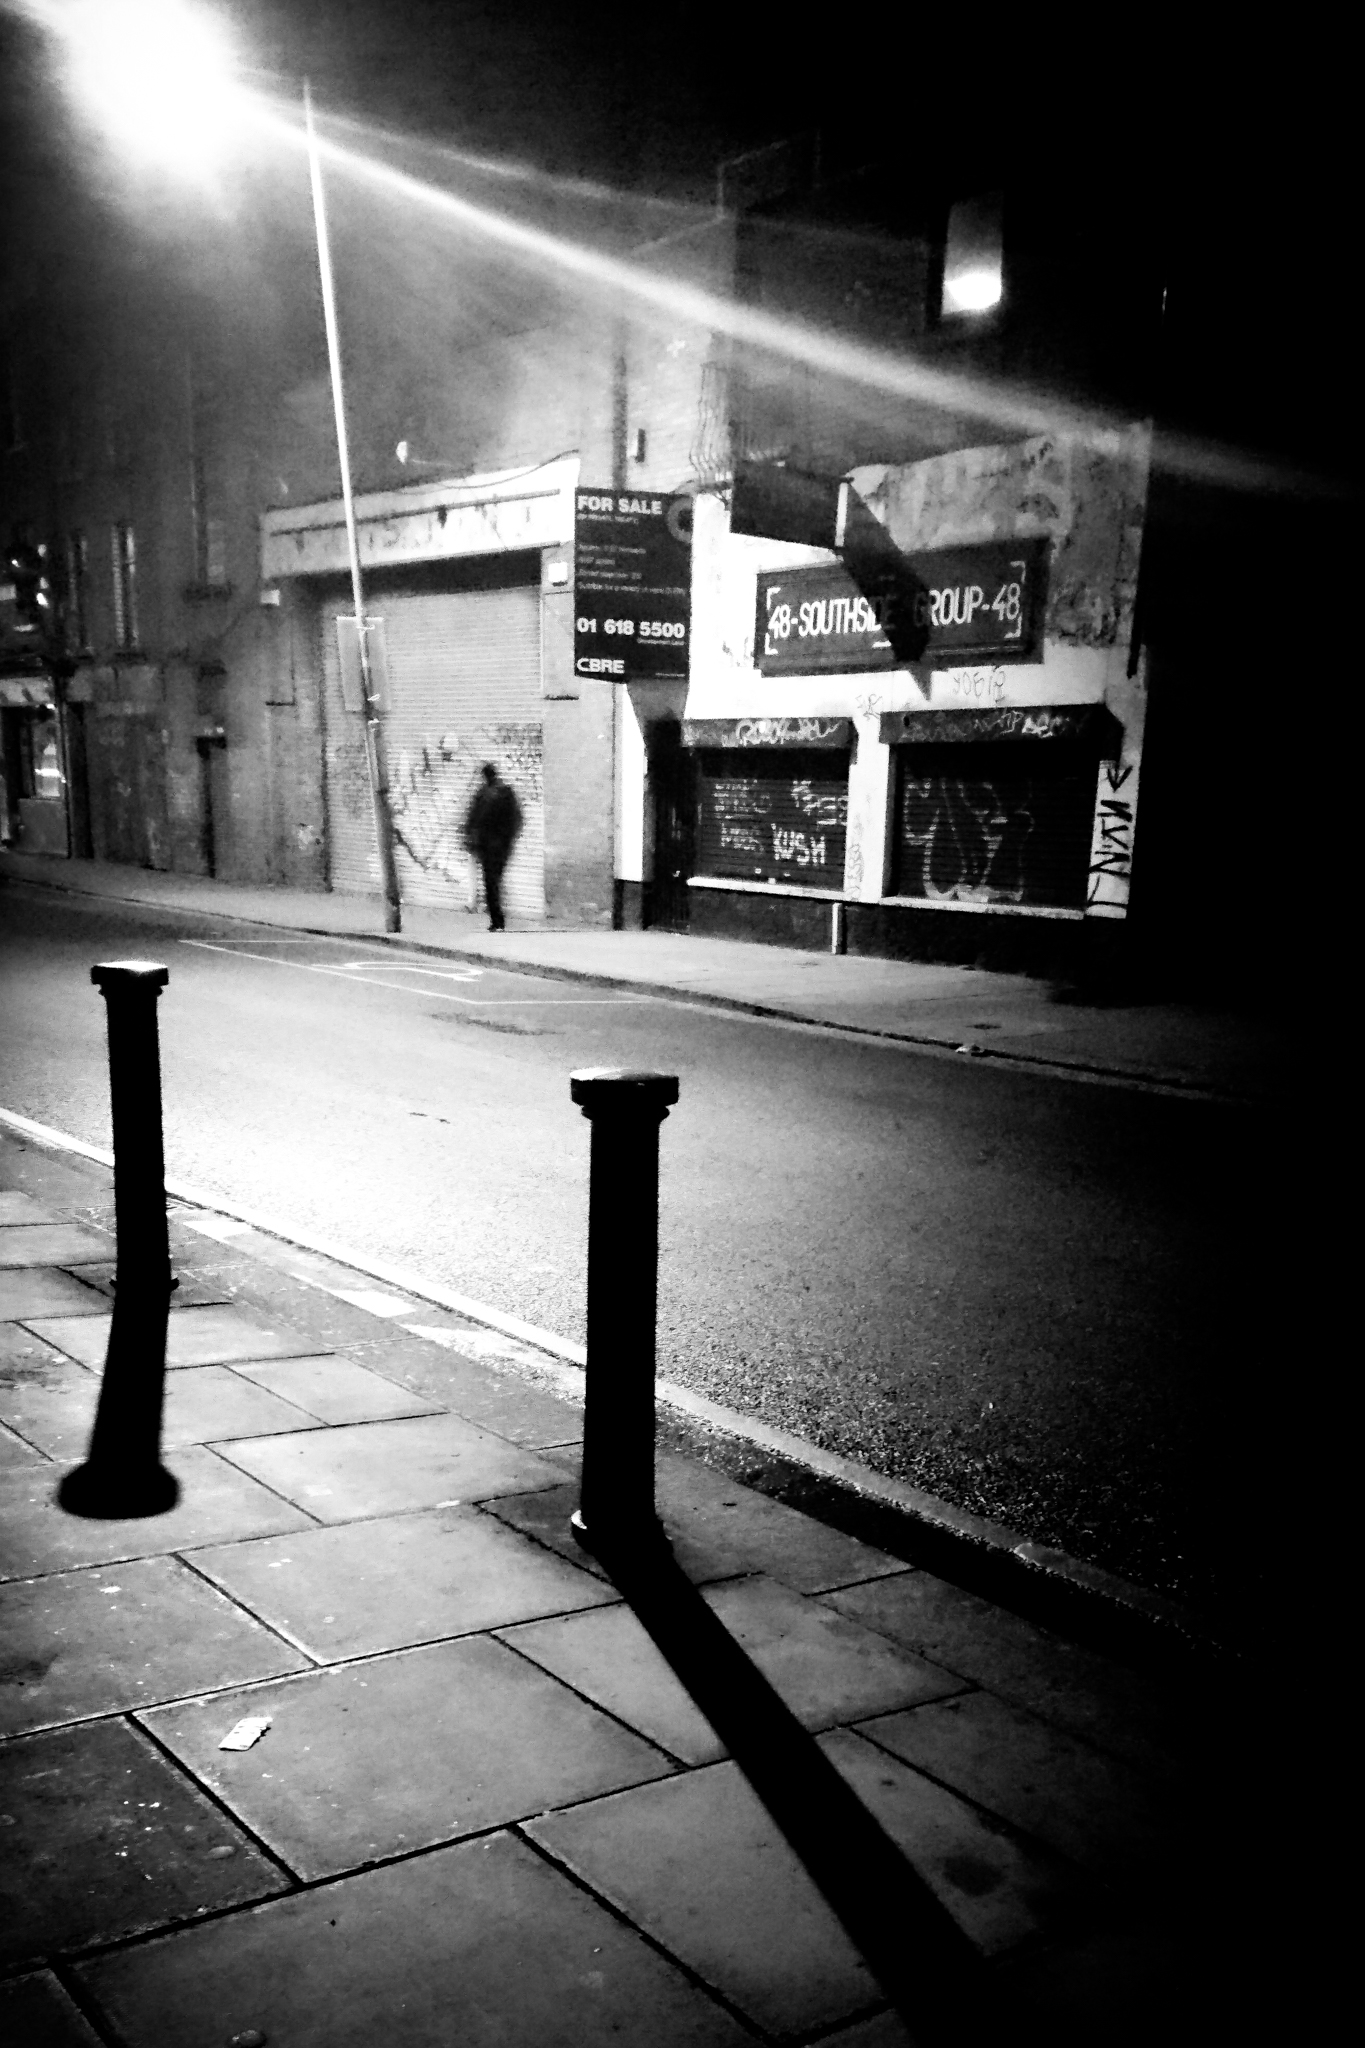 Ghost - Dublin, Ireland - Black and white mobile street photography